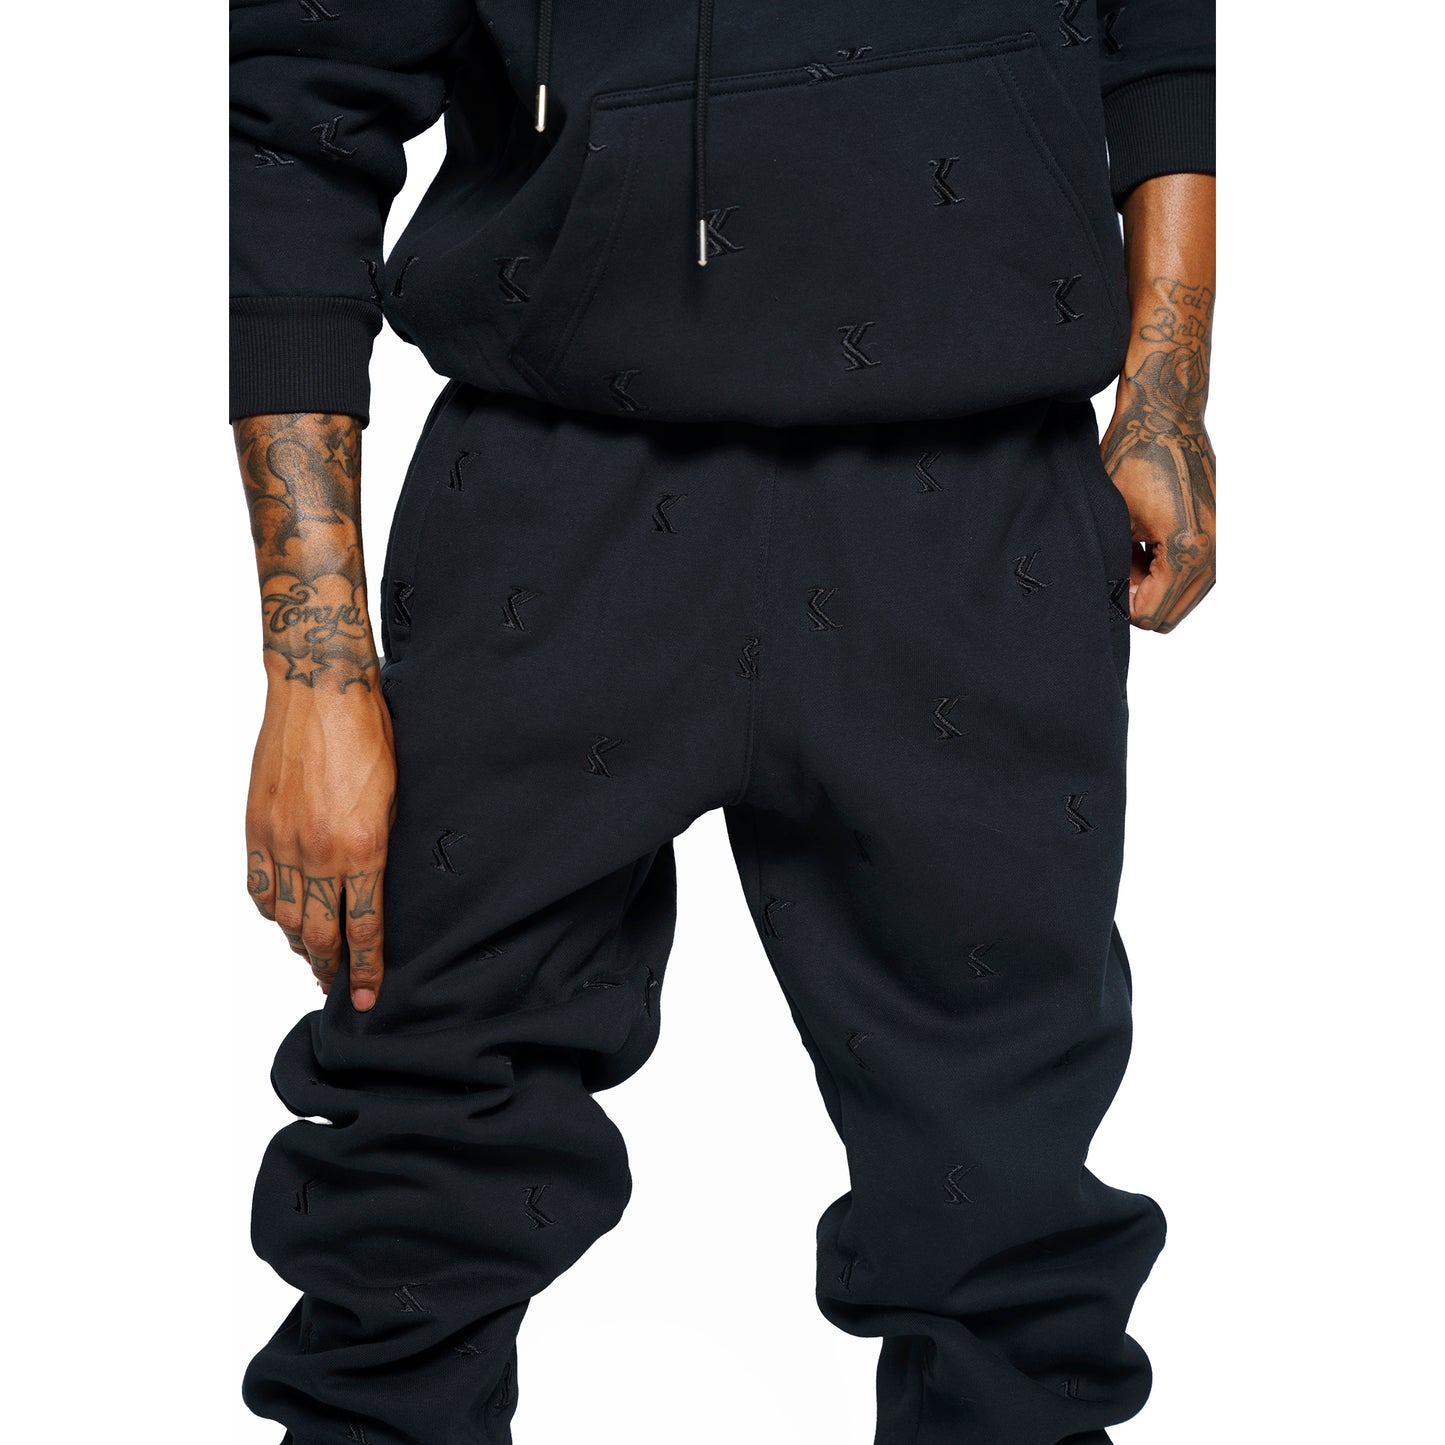 Embroidered Joggers (Black)